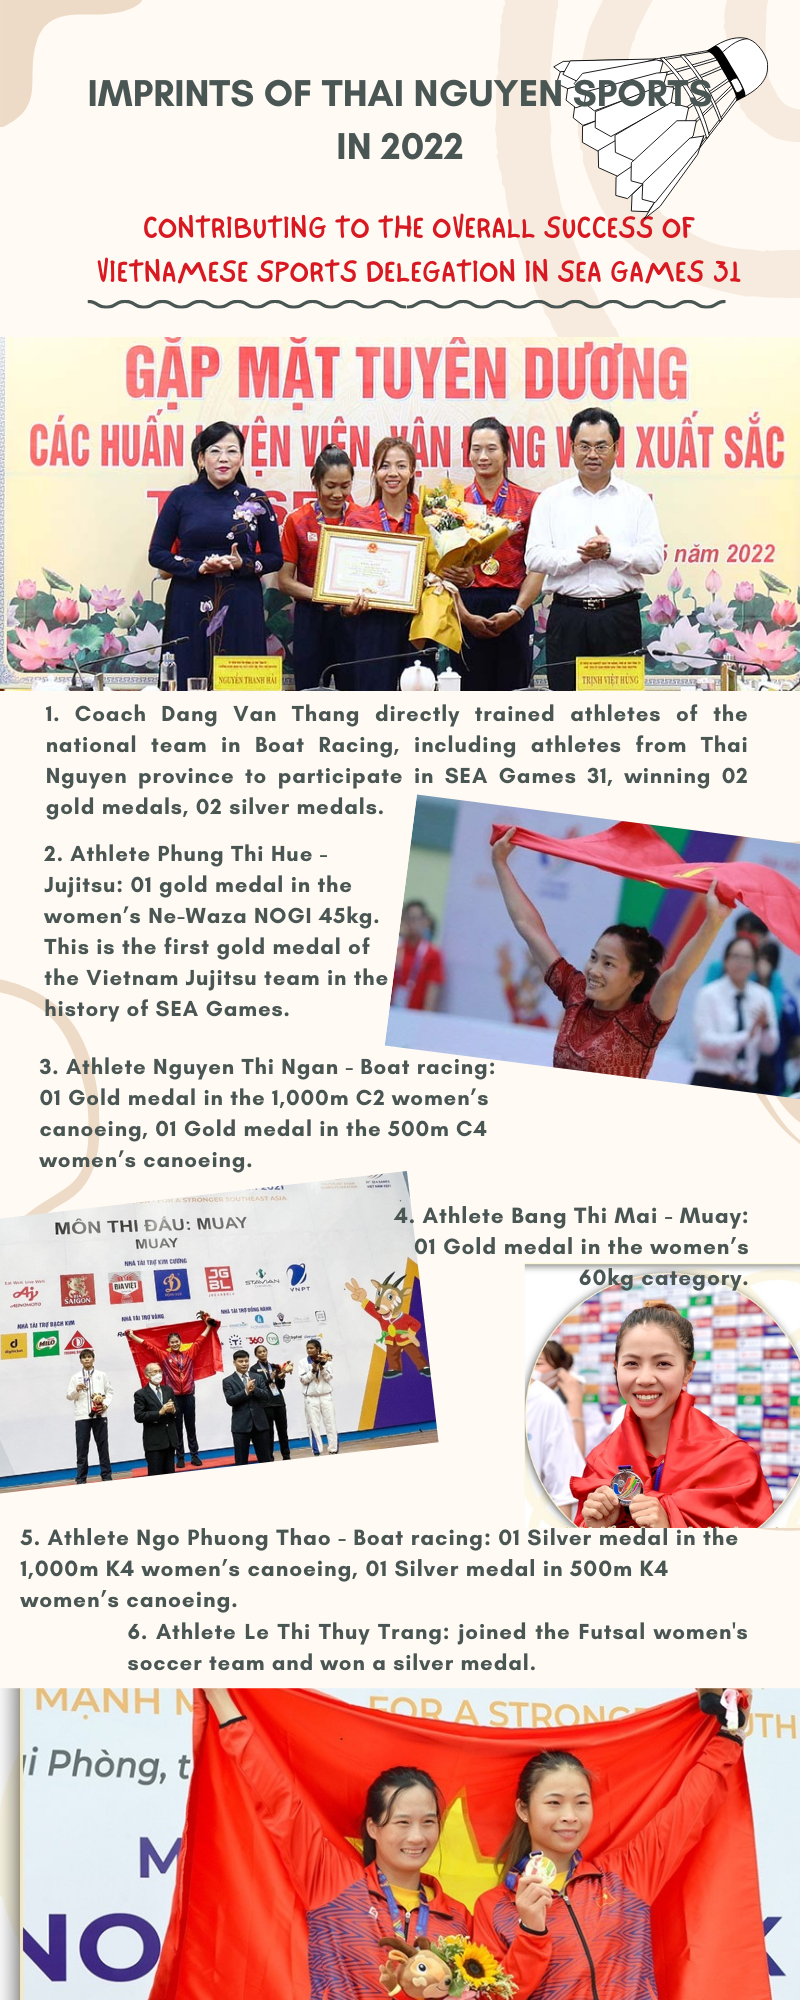 Imprints of Thai Nguyen Sports in 2022